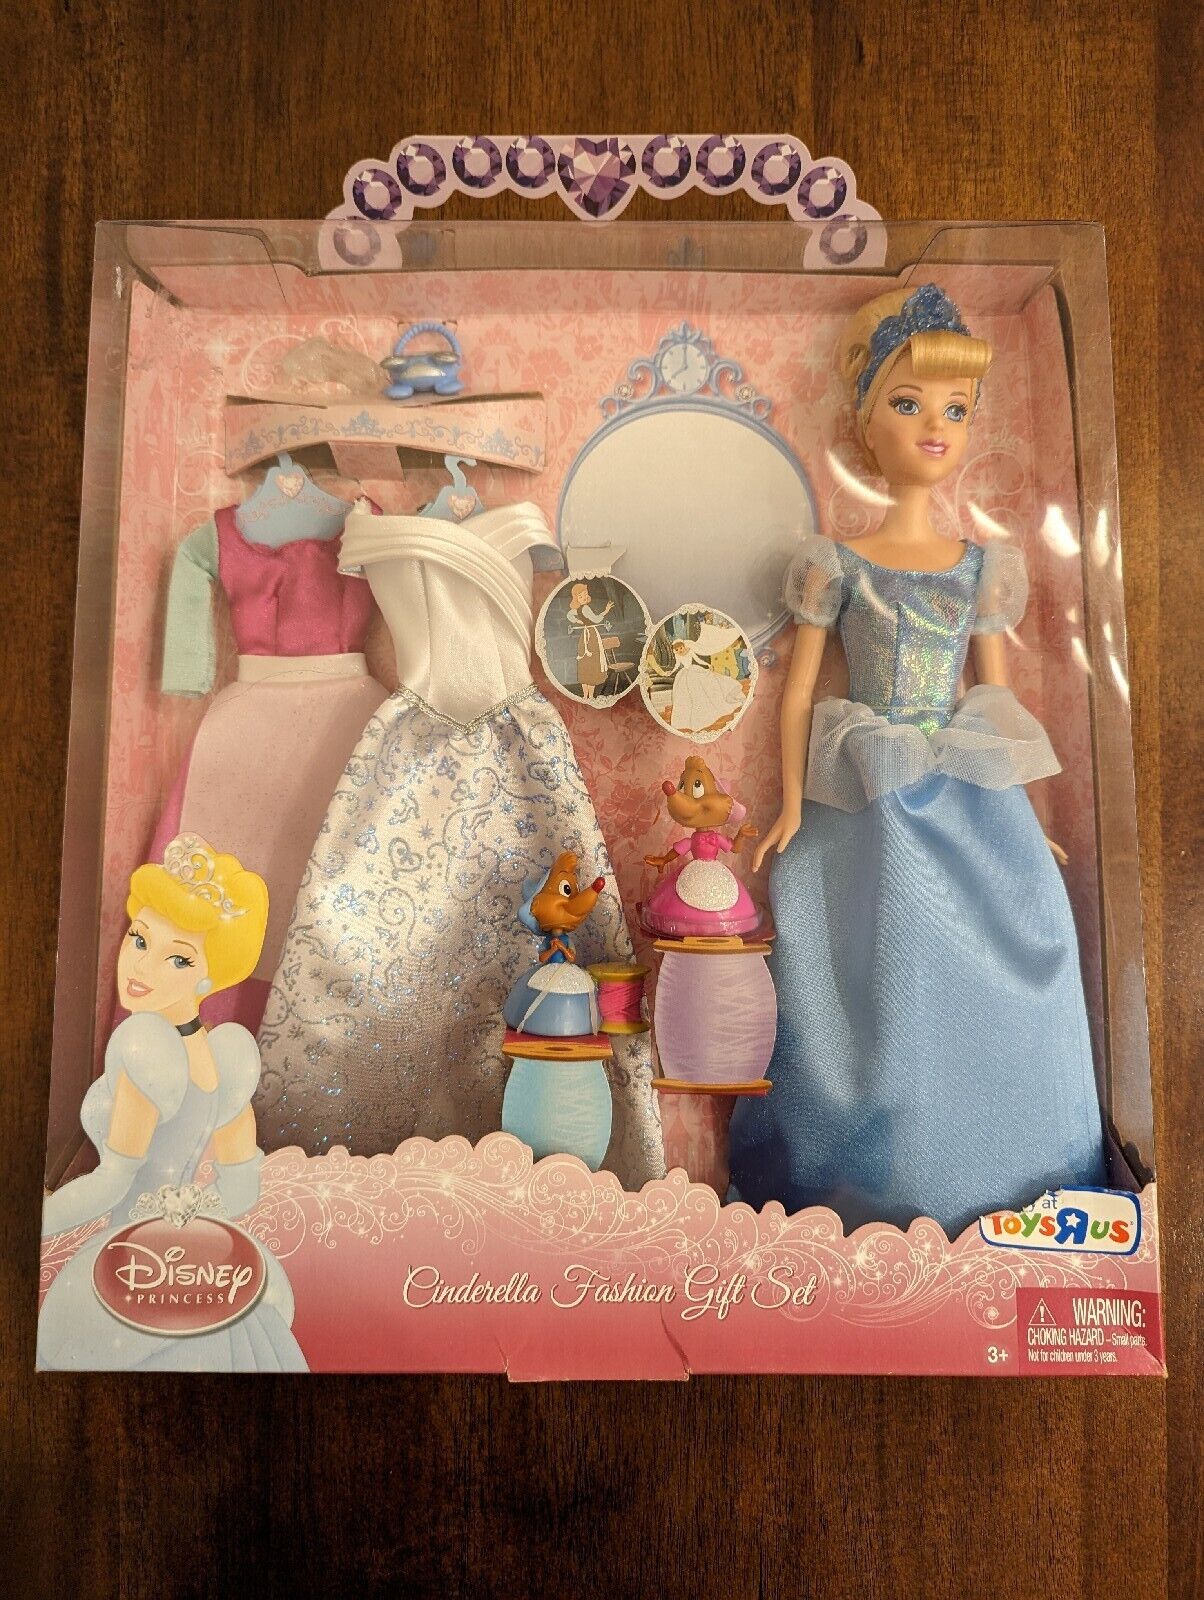 2010 Disney Princess Cinderella Fashion Gift set With Two Extra Dresses,two Mice